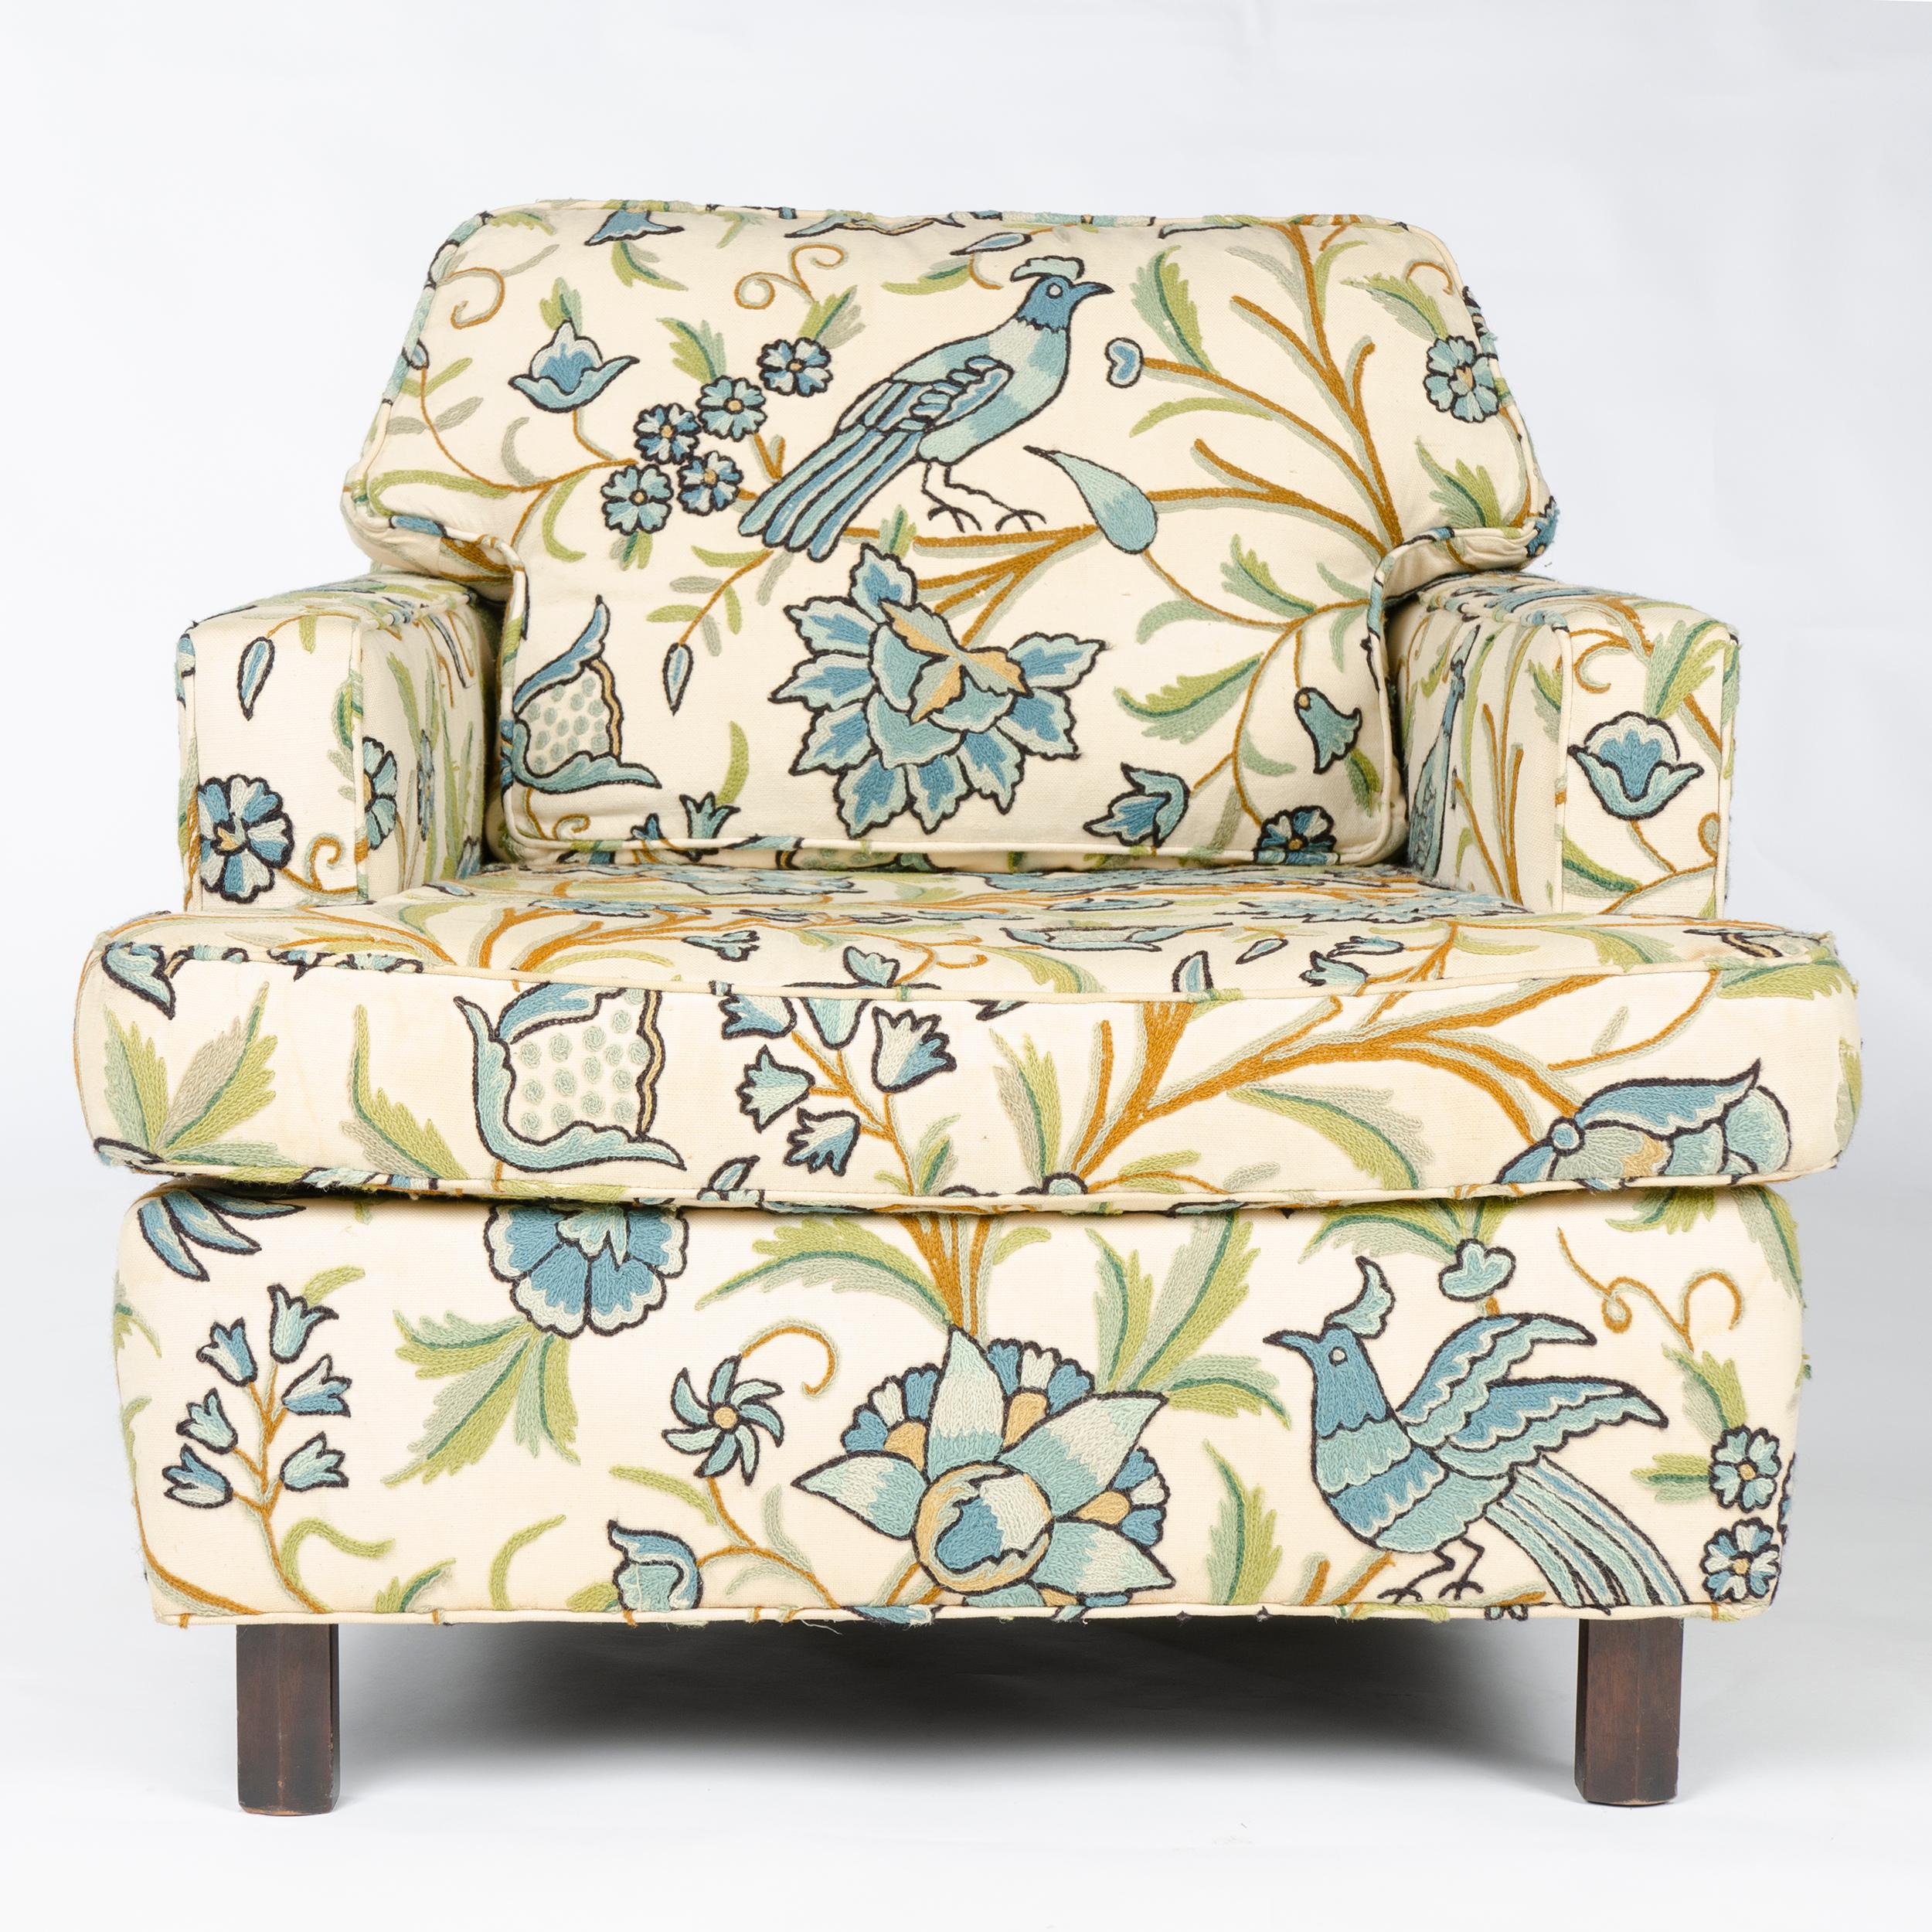 An upholstered lounge chair in vintage flora and fauna print having two swivel casters, designed in 1958 as an addition to the Conversations Group introduced in 1955.